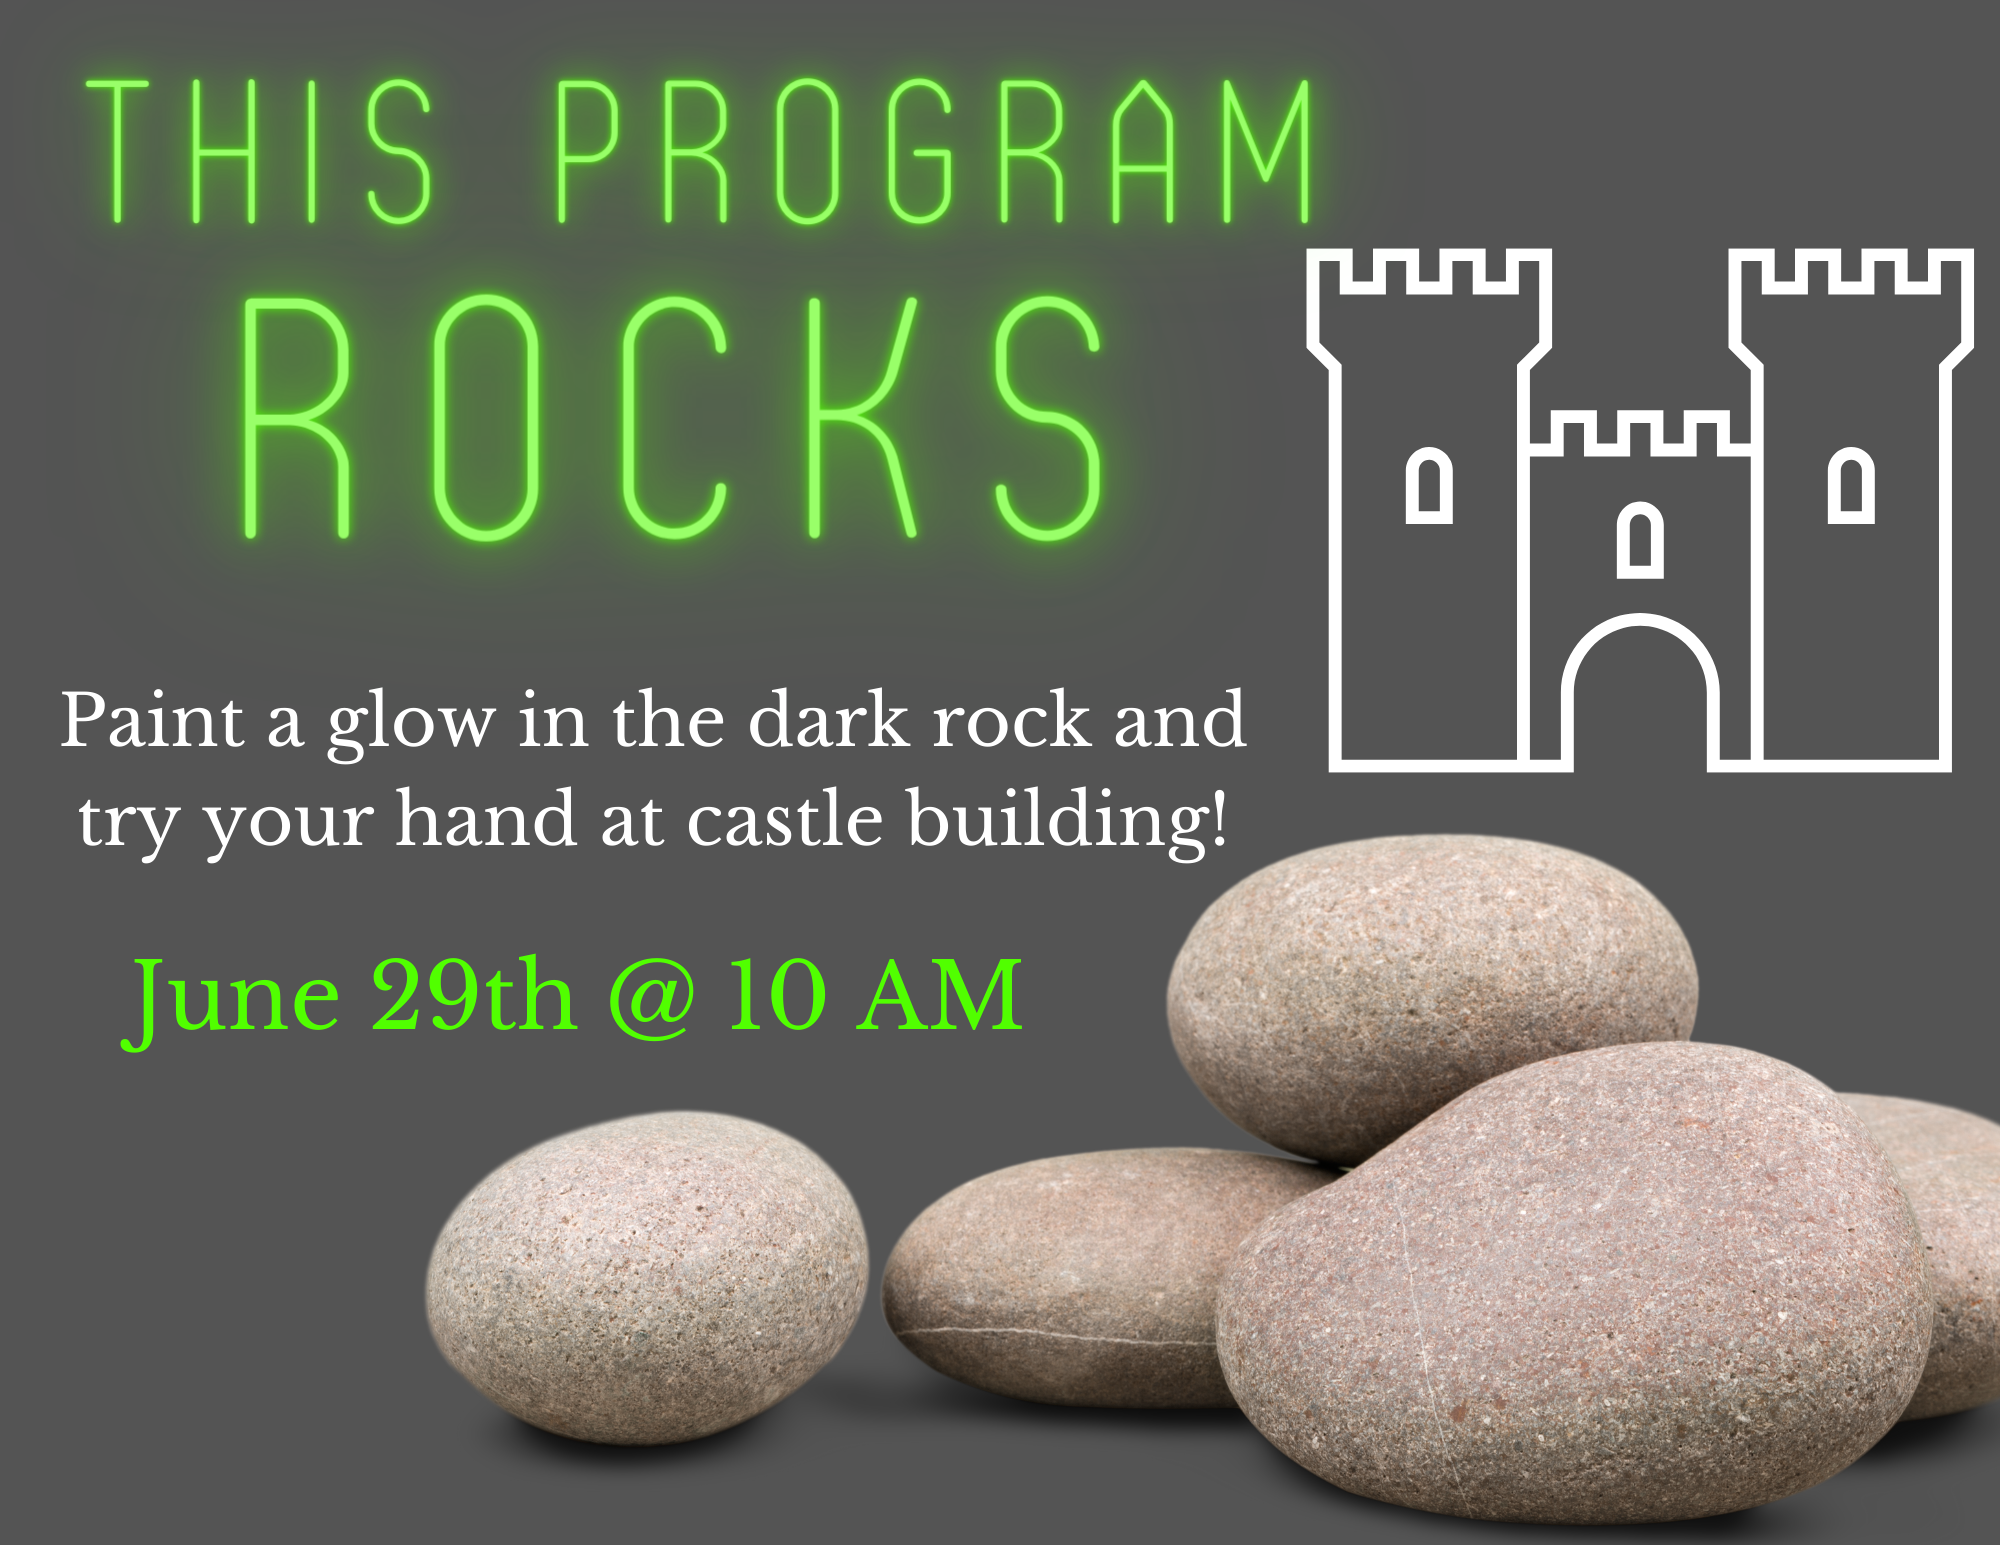 "This program rocks" in glowing green text beside a pile of rocks